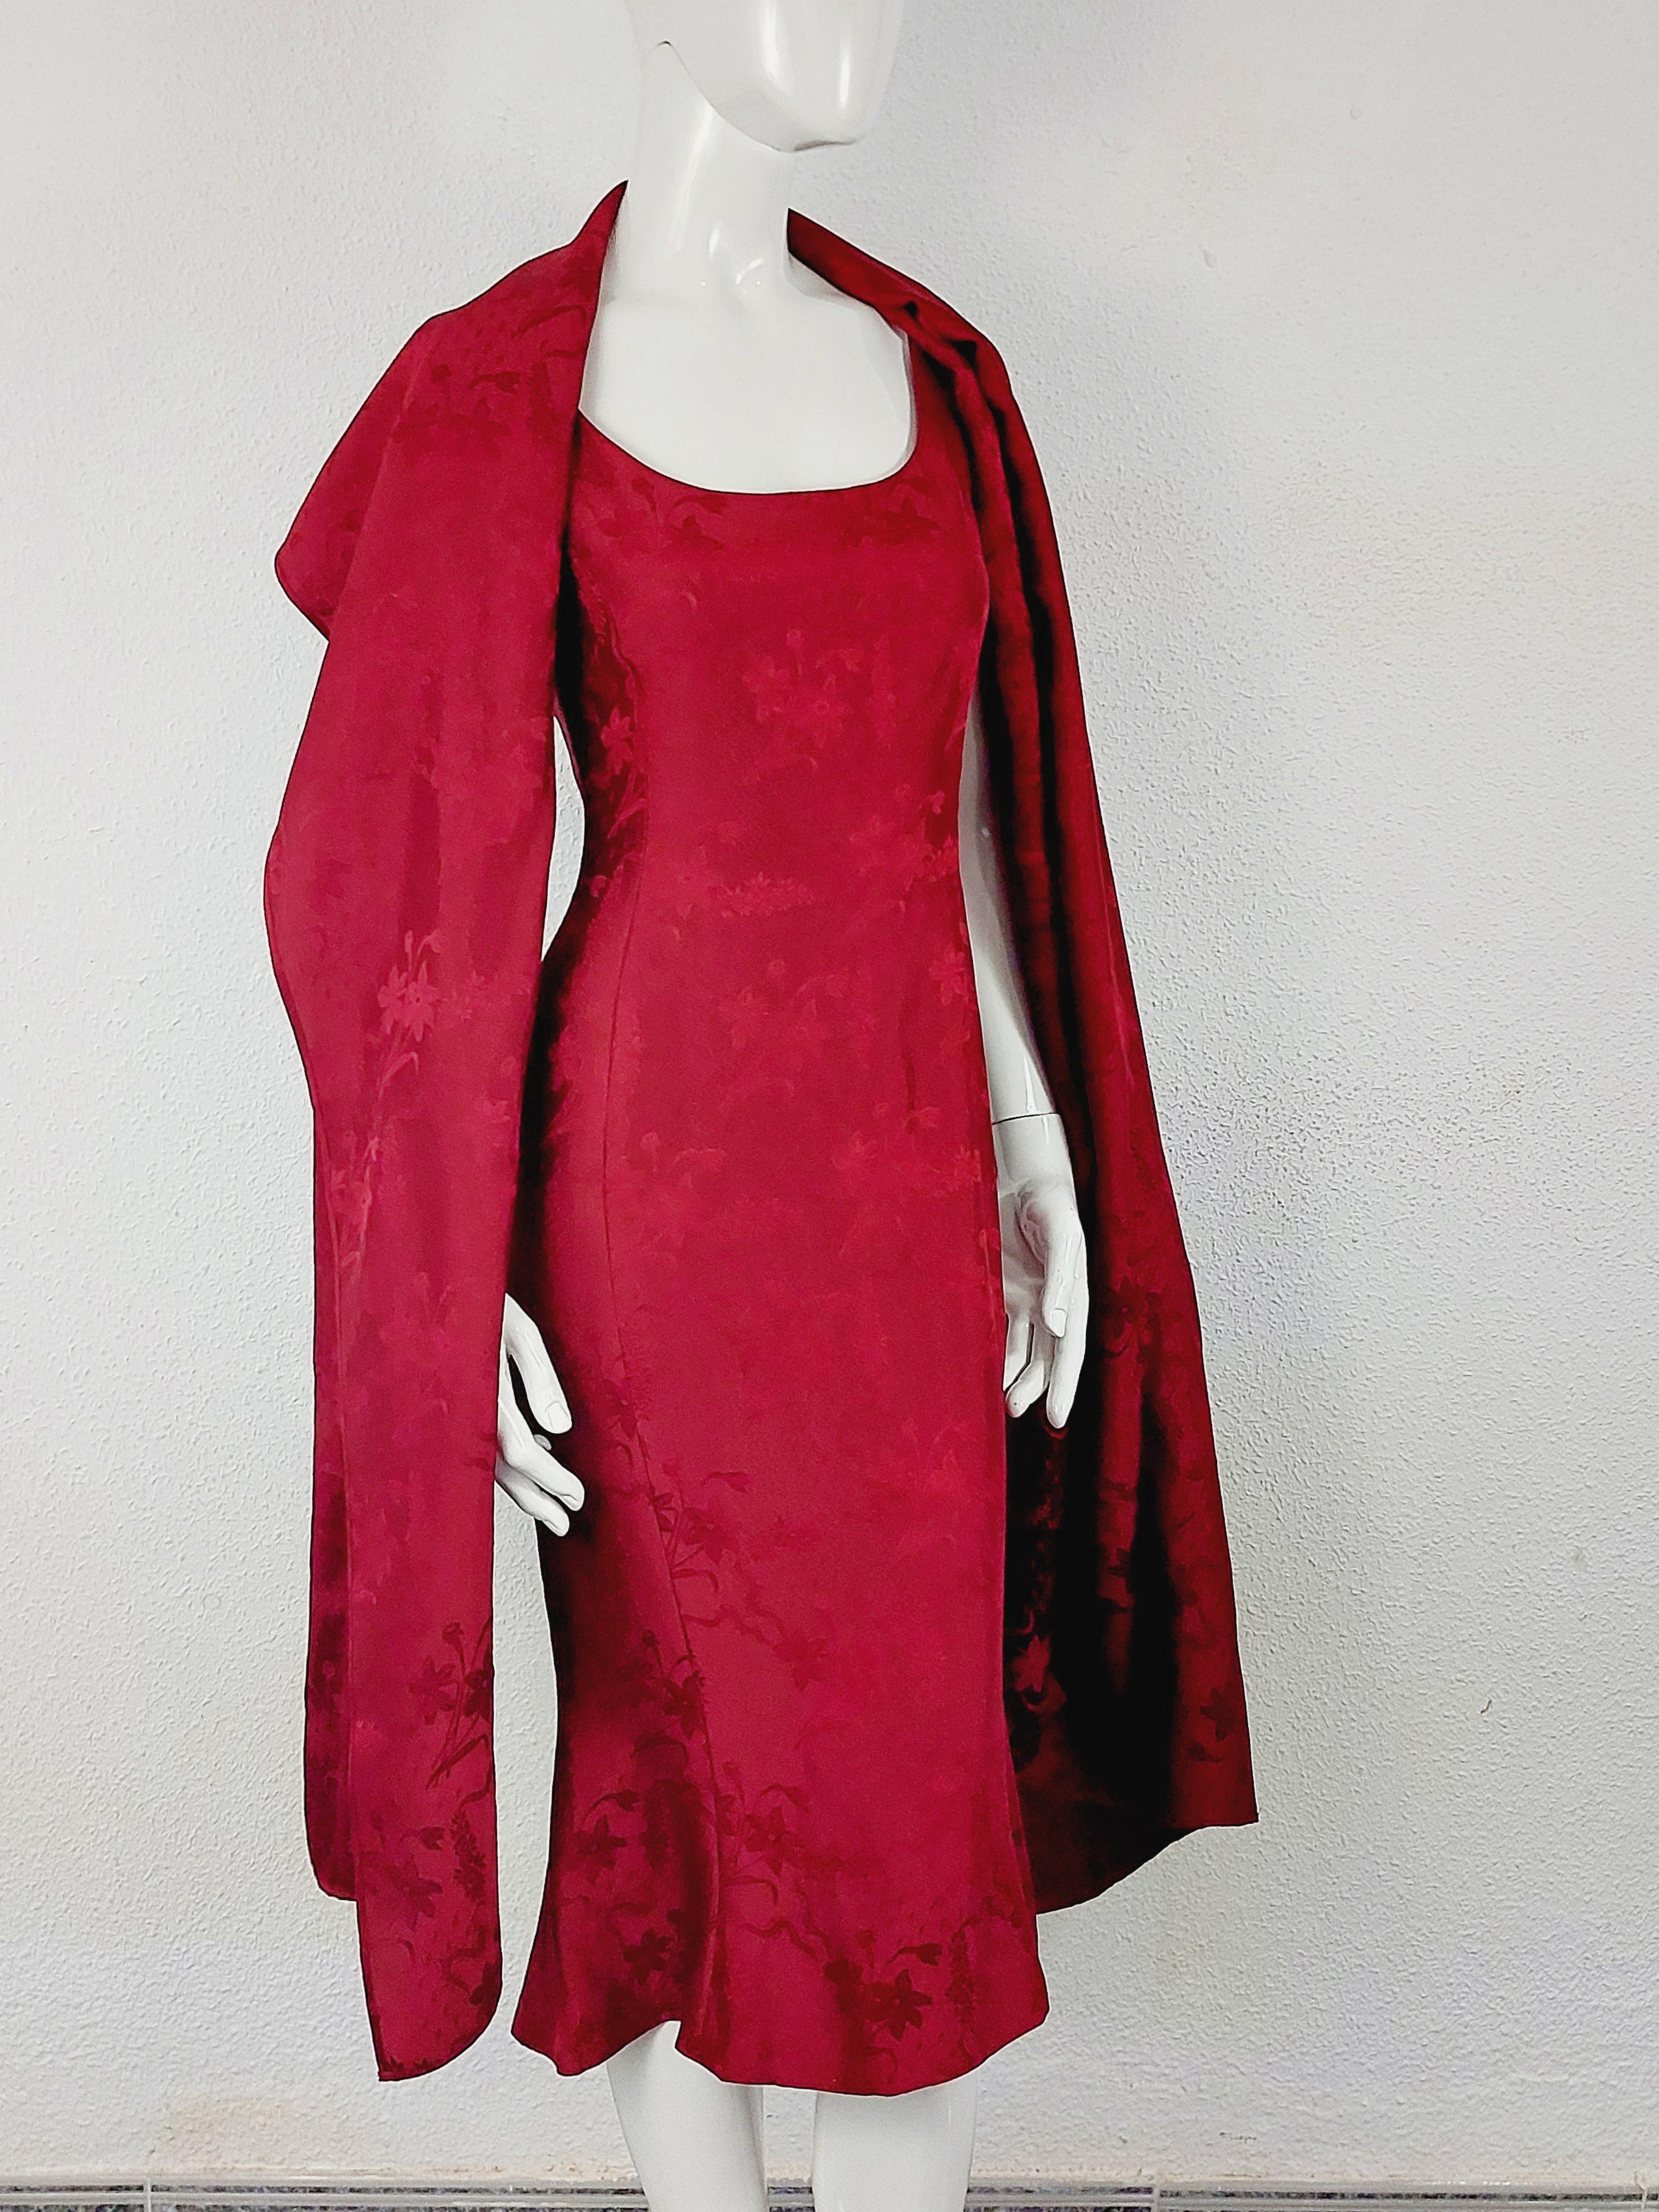 John Galliano London Red Silk Brocade Floral Runway Evening Gown Dress w Stola For Sale 9